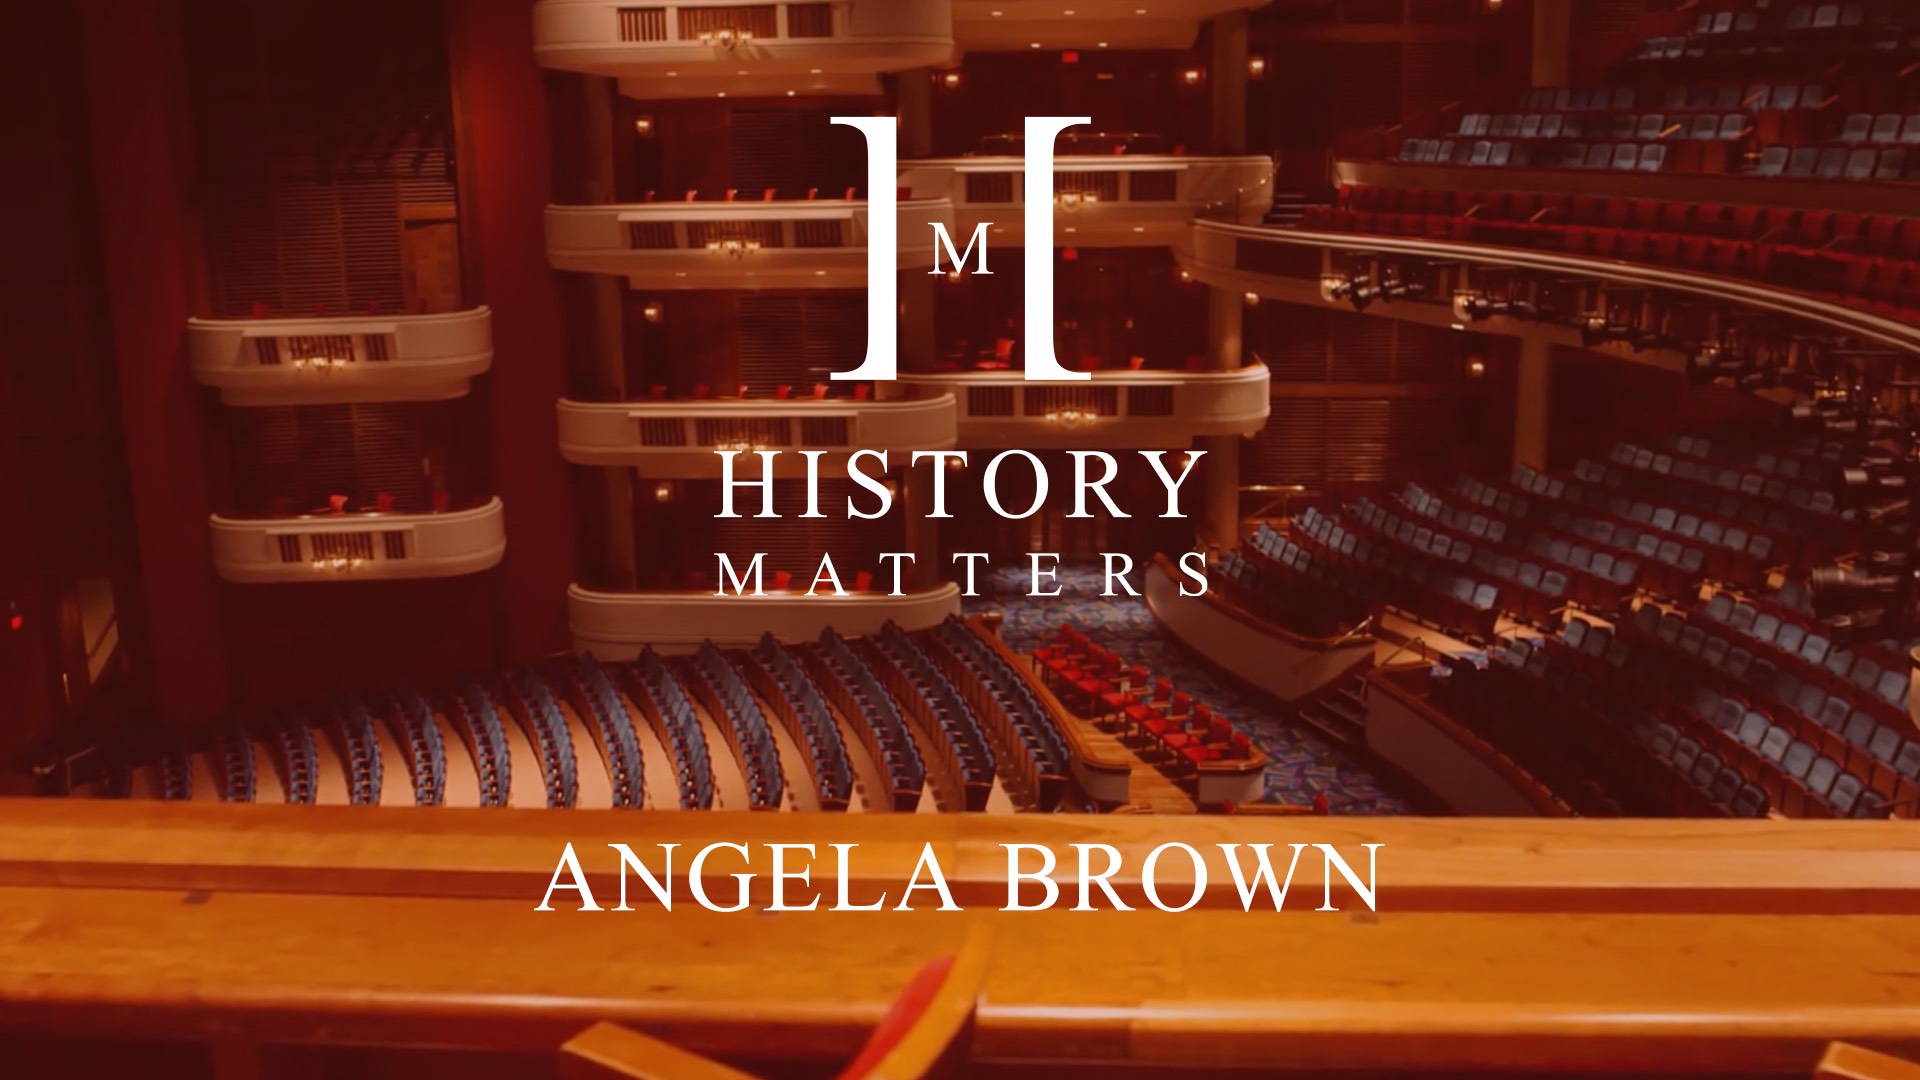 History Matters Angela Brown by Victoria Ranger